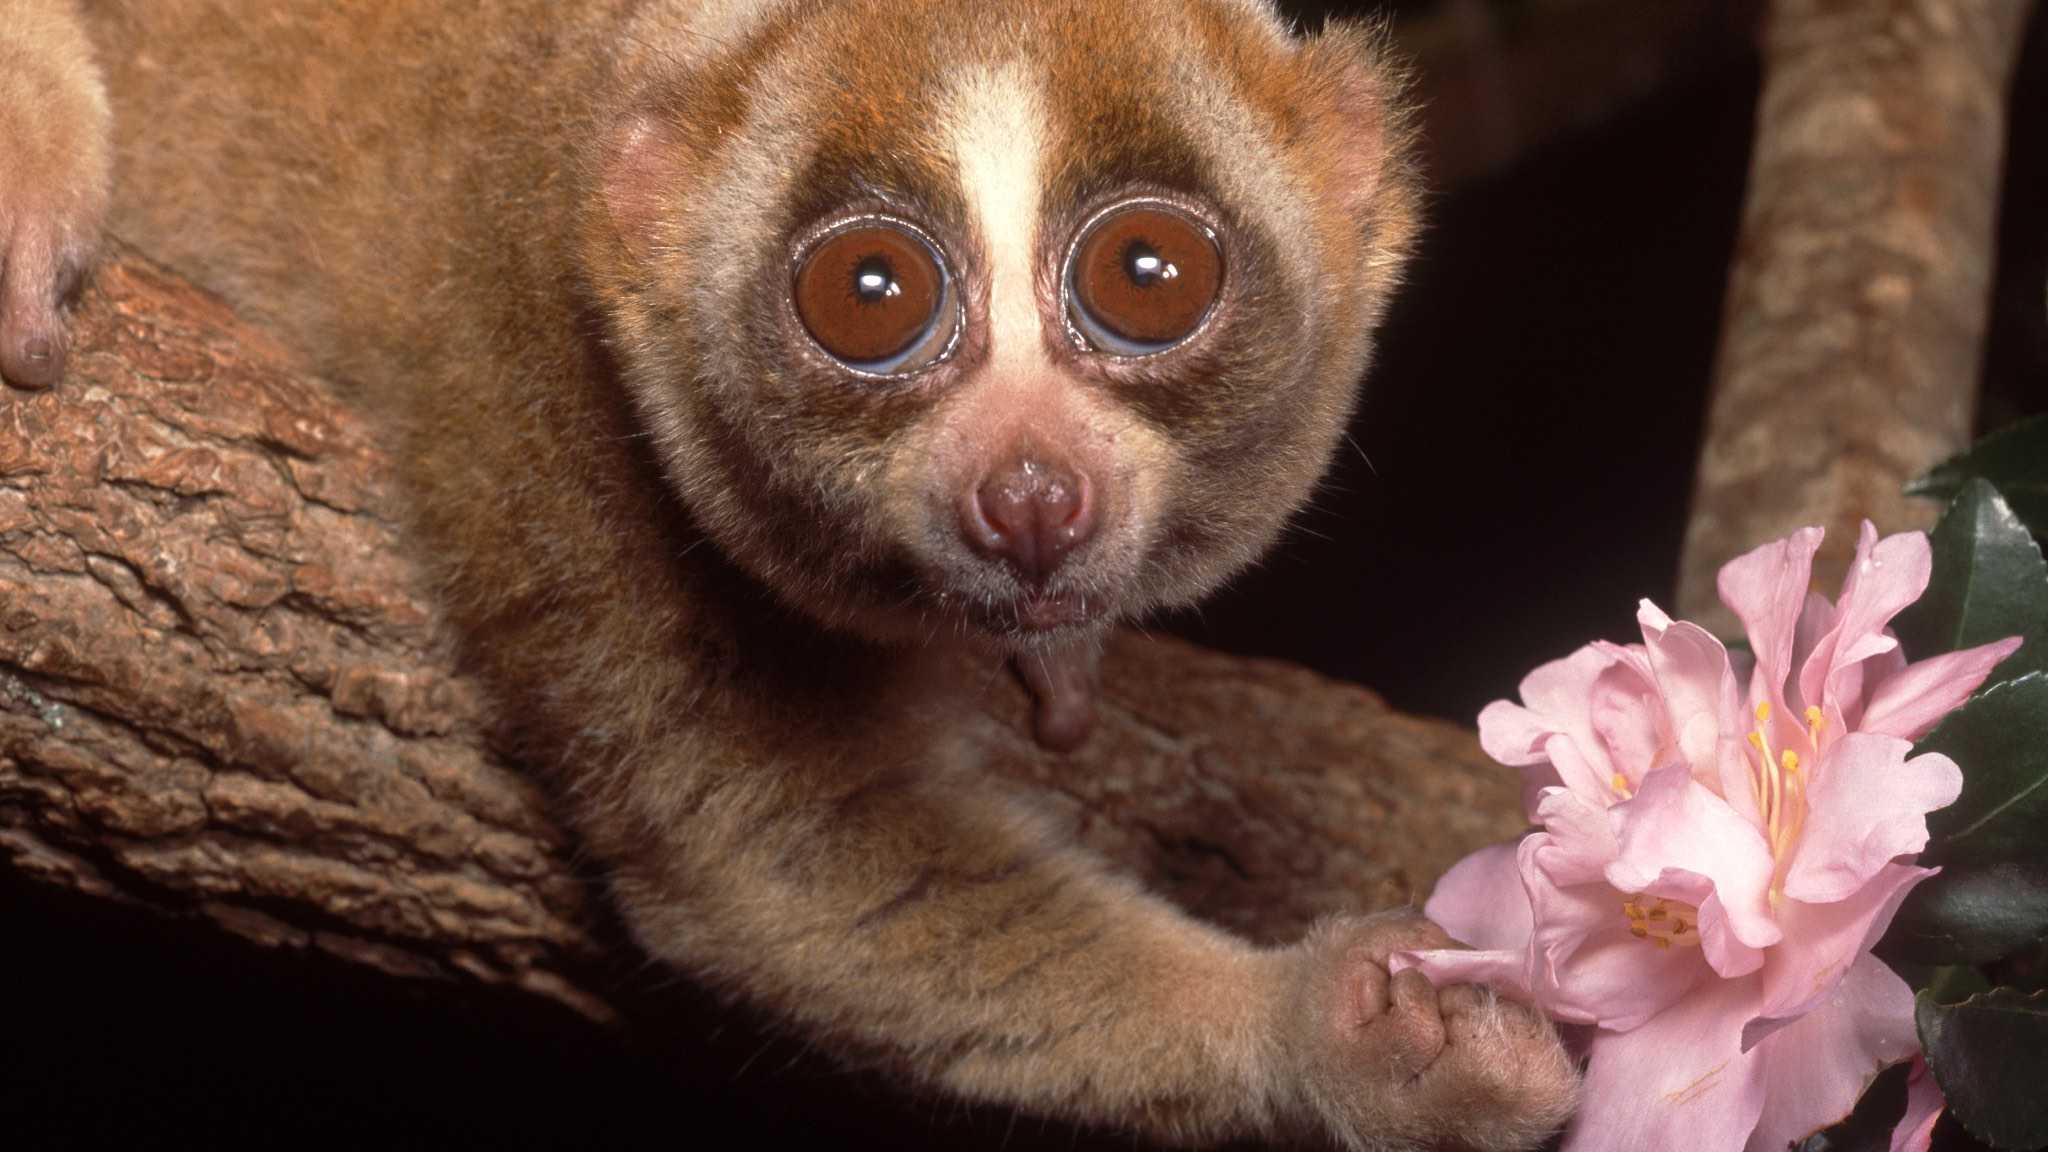 Rescued slow lorises returned to wild in SW China